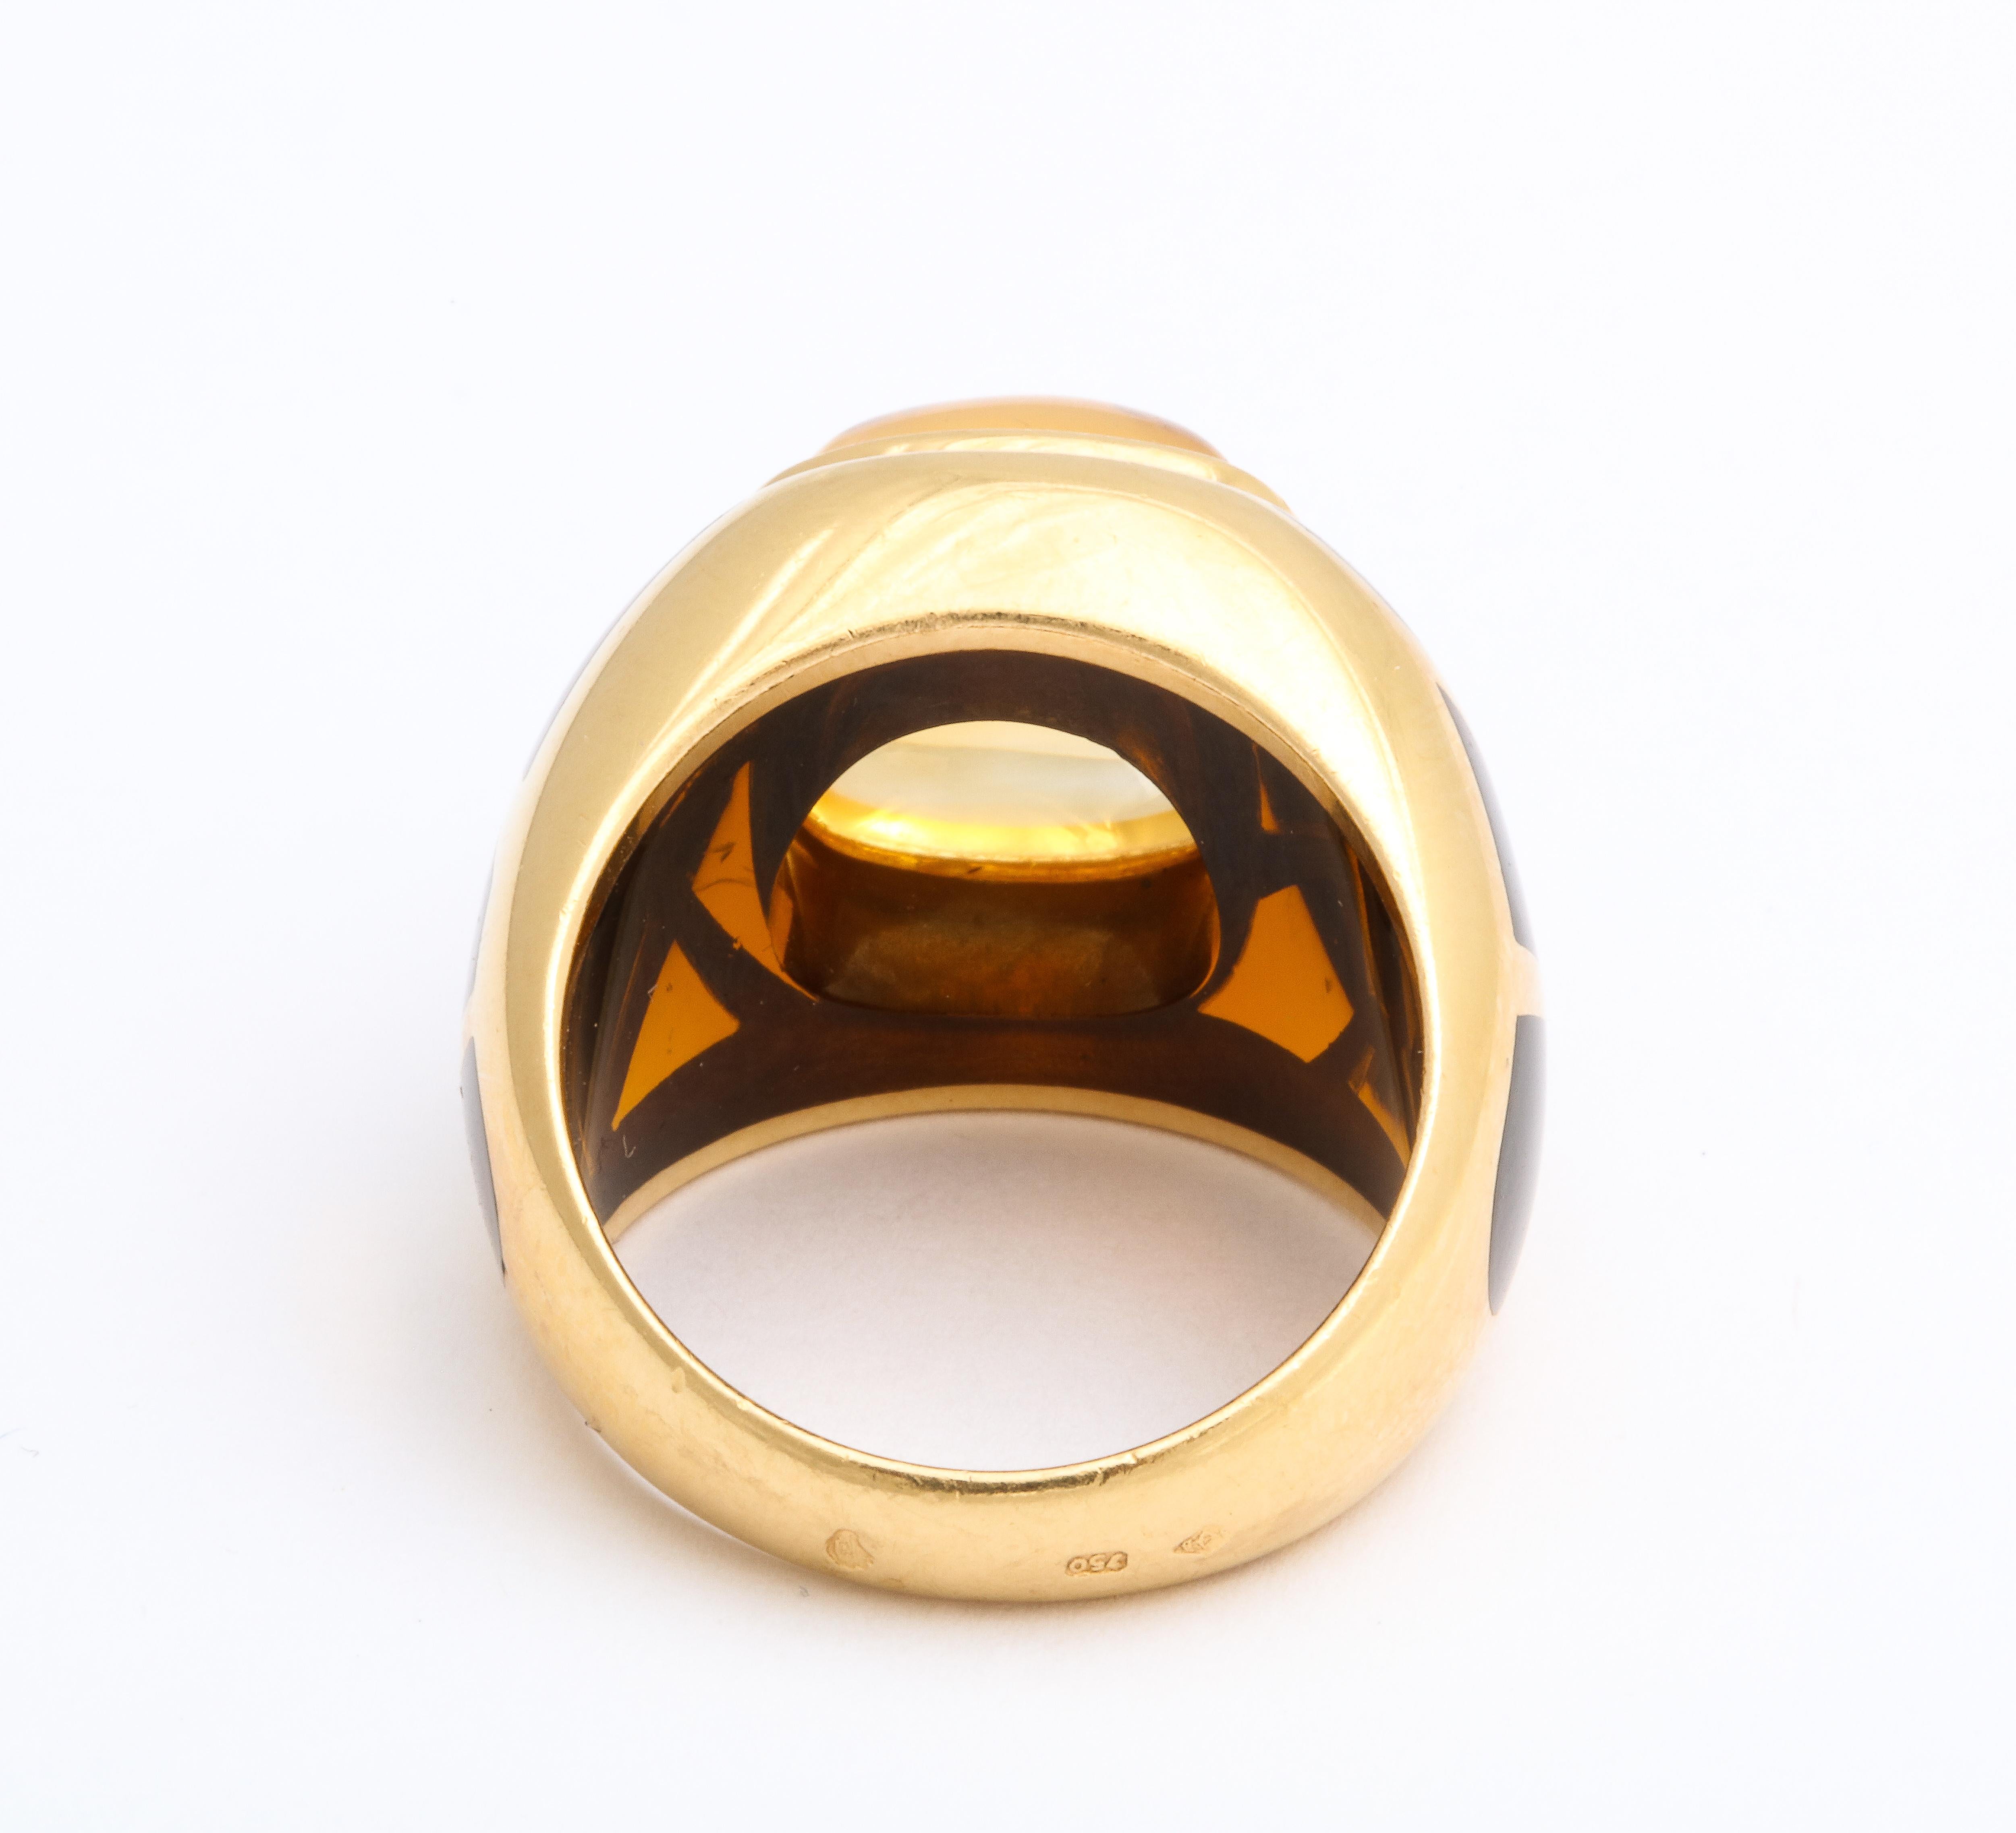 Sugarloaf Cabochon Boivin  Citrine and Gold Dome Ring 